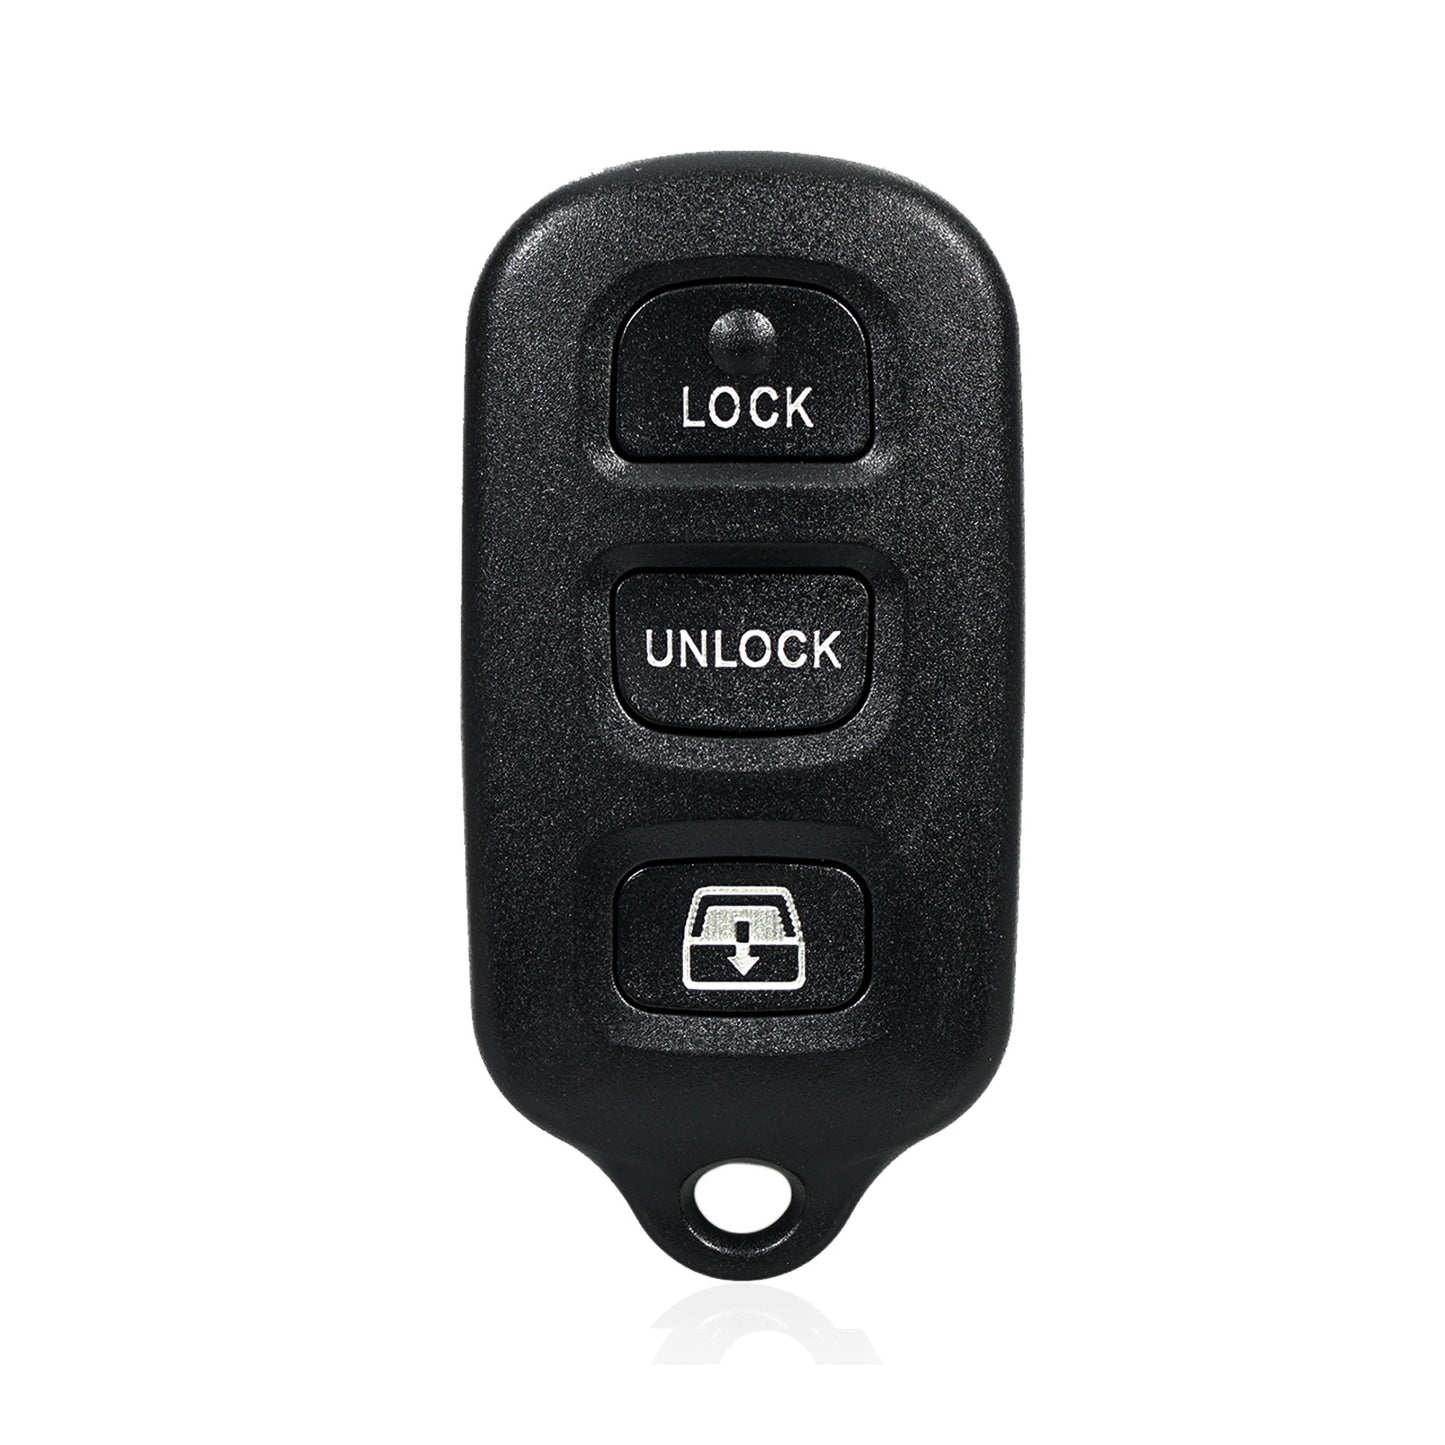 4 Buttons 314MHz Keyless Entry Fob Remote Car Key For 1999-2009 Toyota 4Runner (without red LED on original remote) Sequoia (without red LED on original remote)FCC ID: HYQ12BBX  HYQ12BAN HYQ1512Y SKU : J72